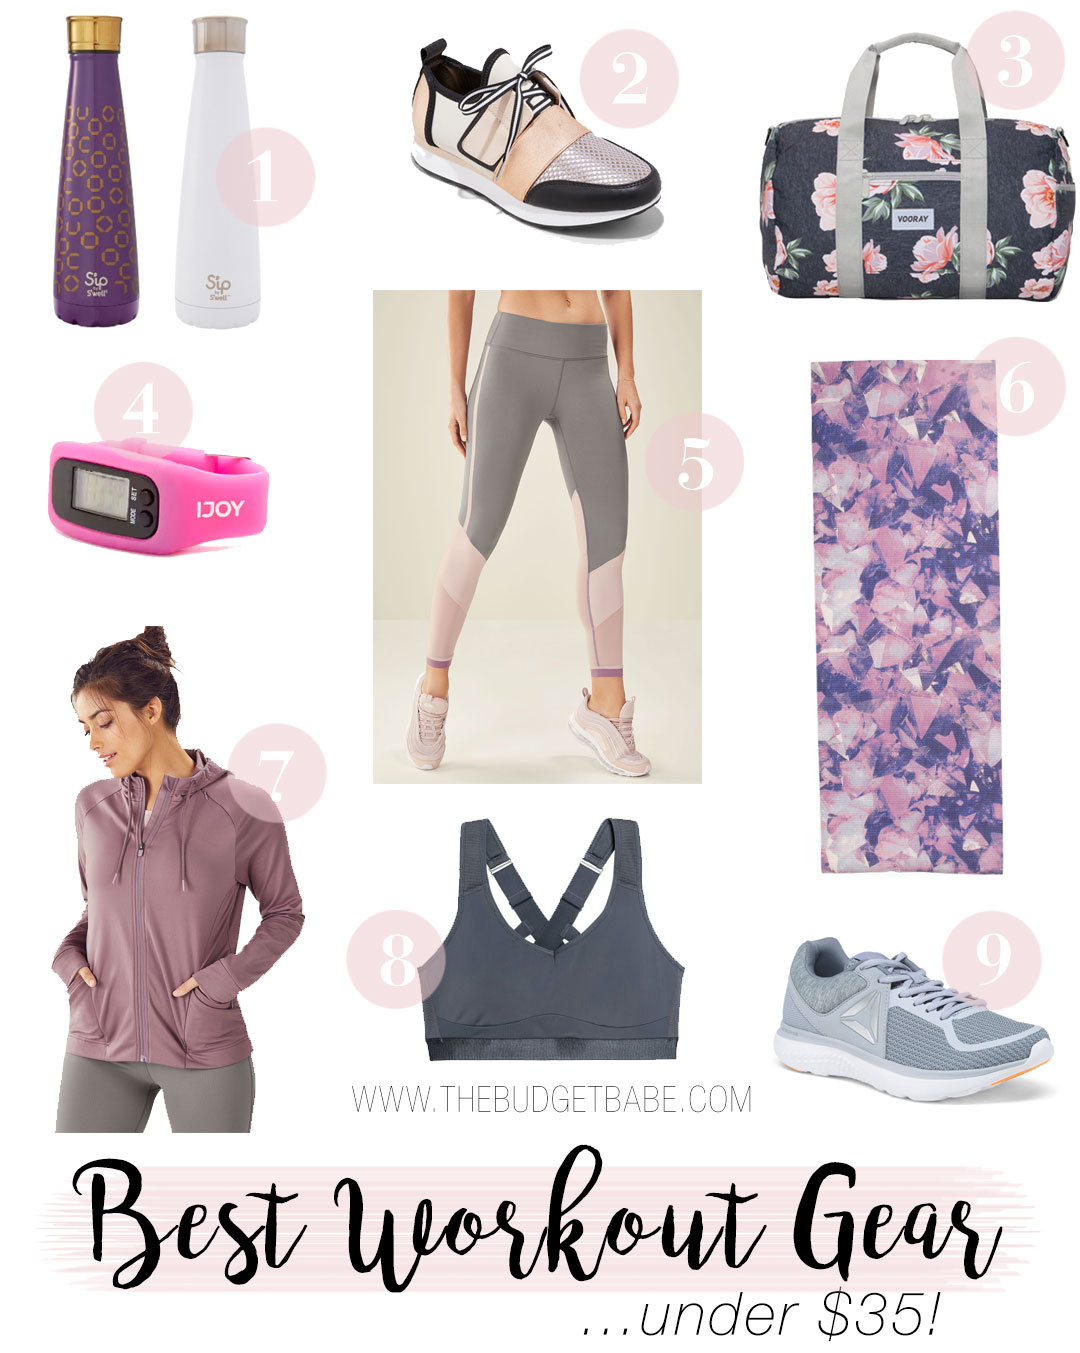 Where to shop for the best workout gear on a budget